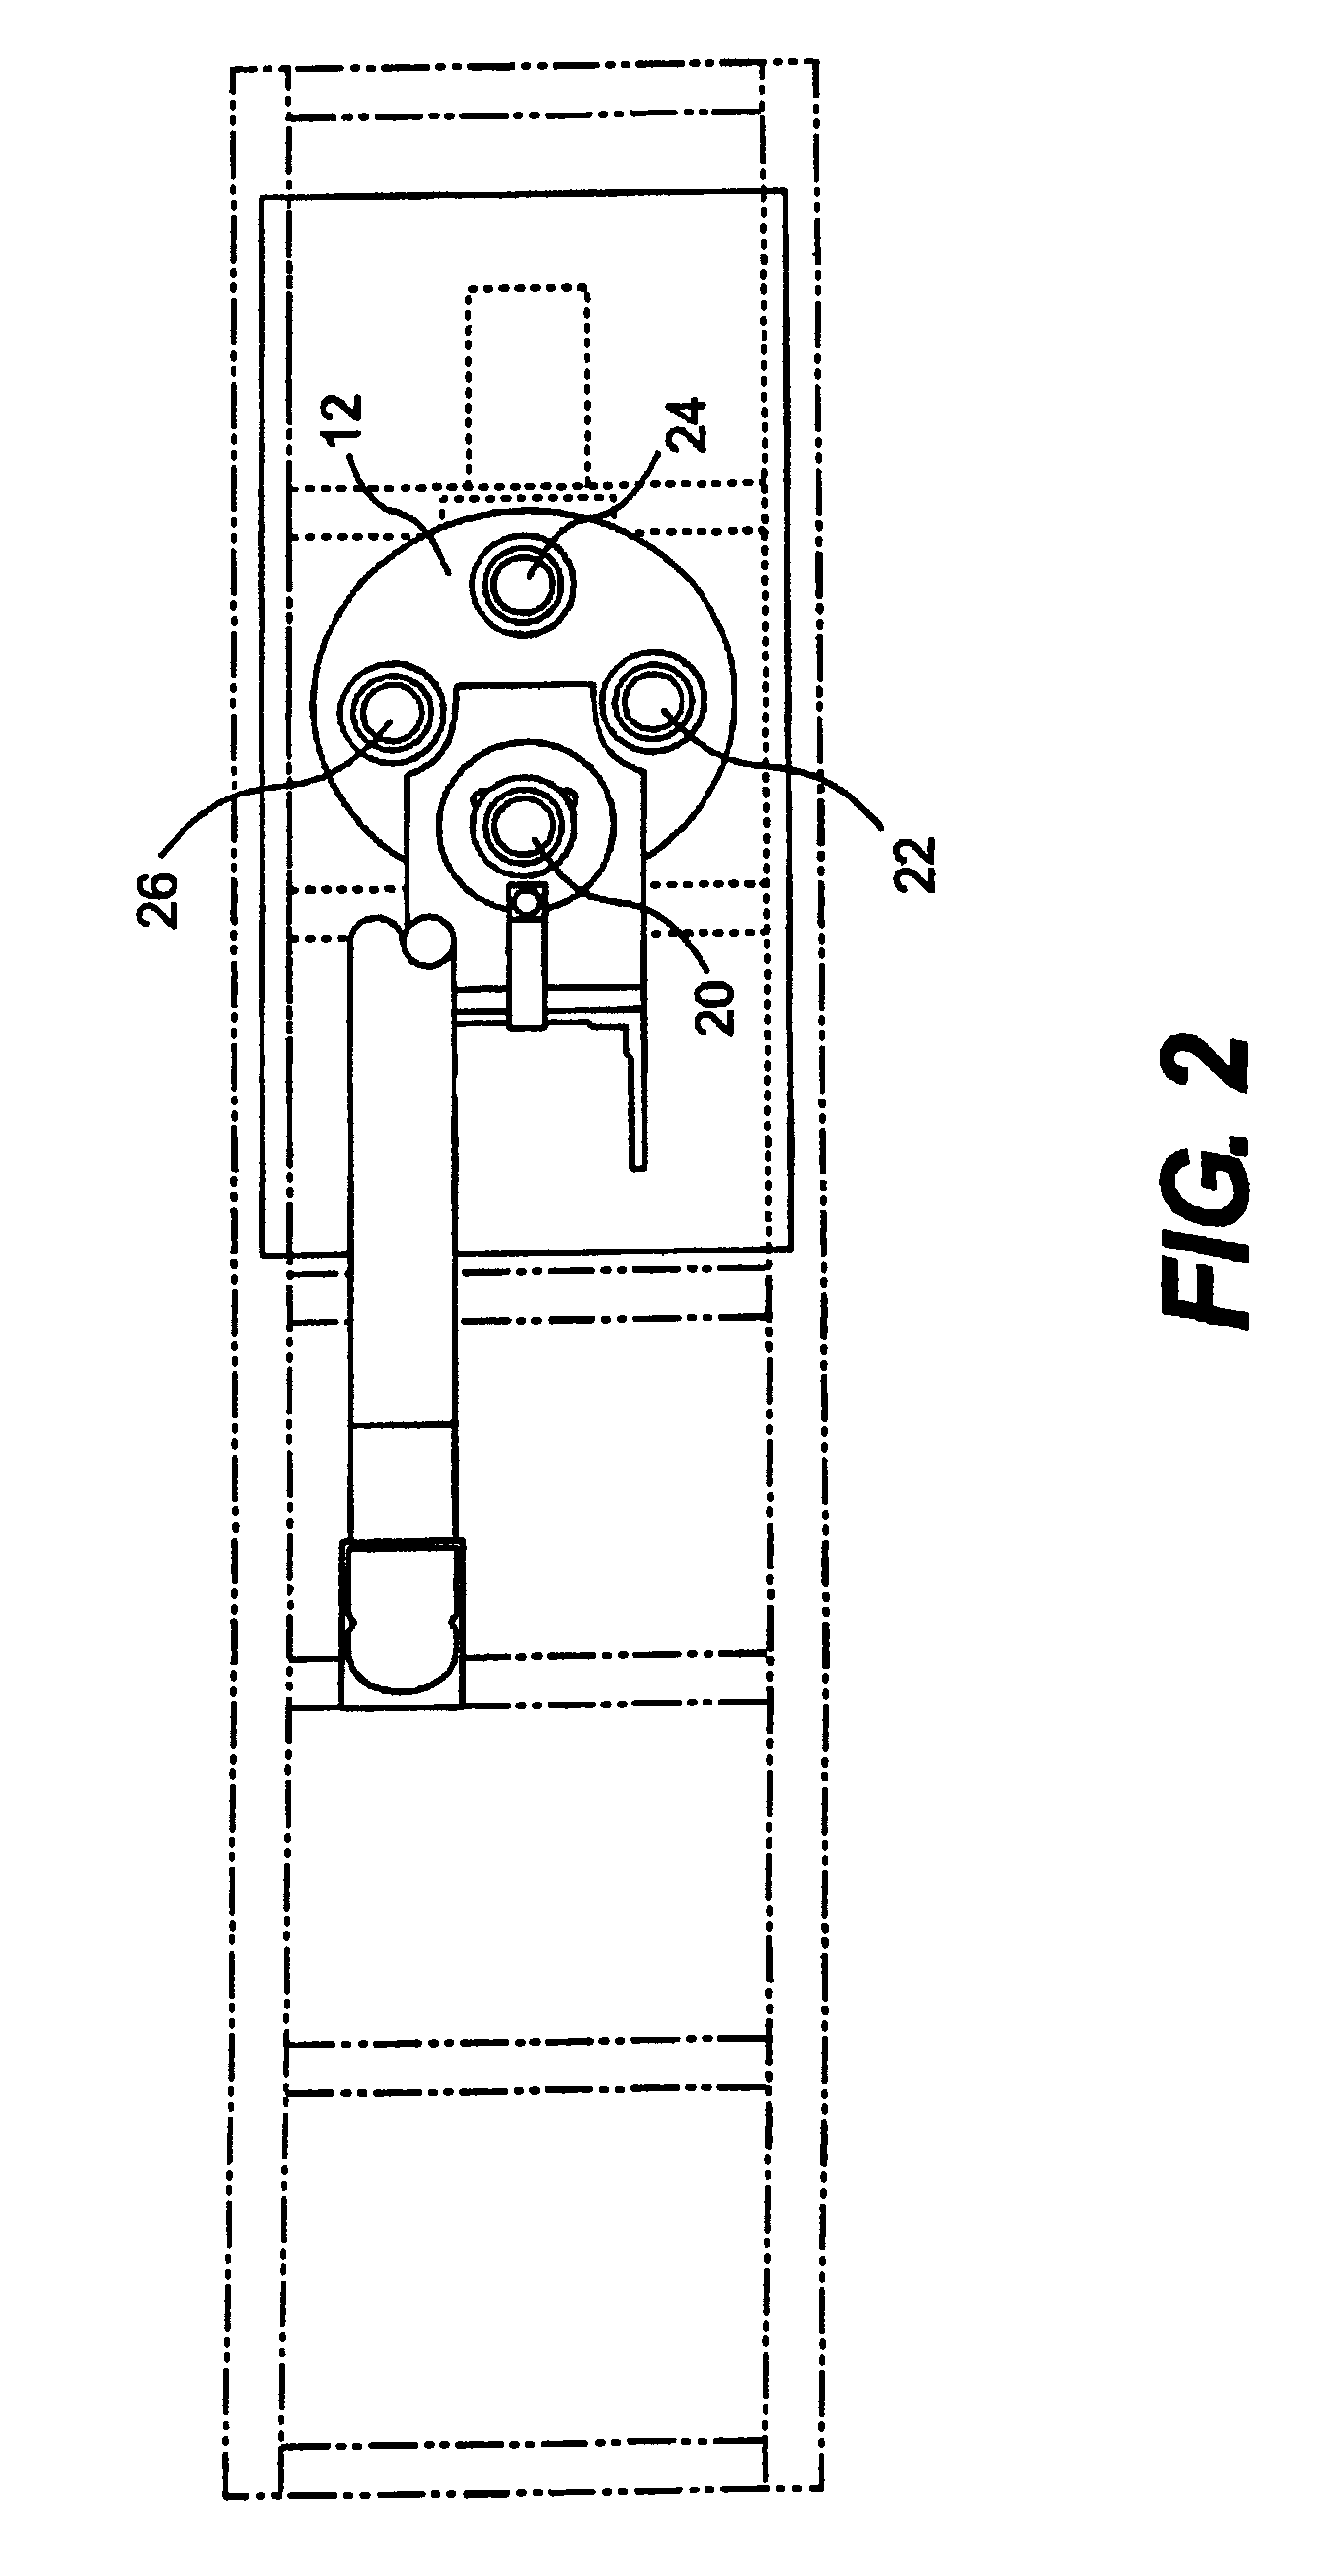 Method and apparatus for producing labeled, plastic foam containers, and product of same